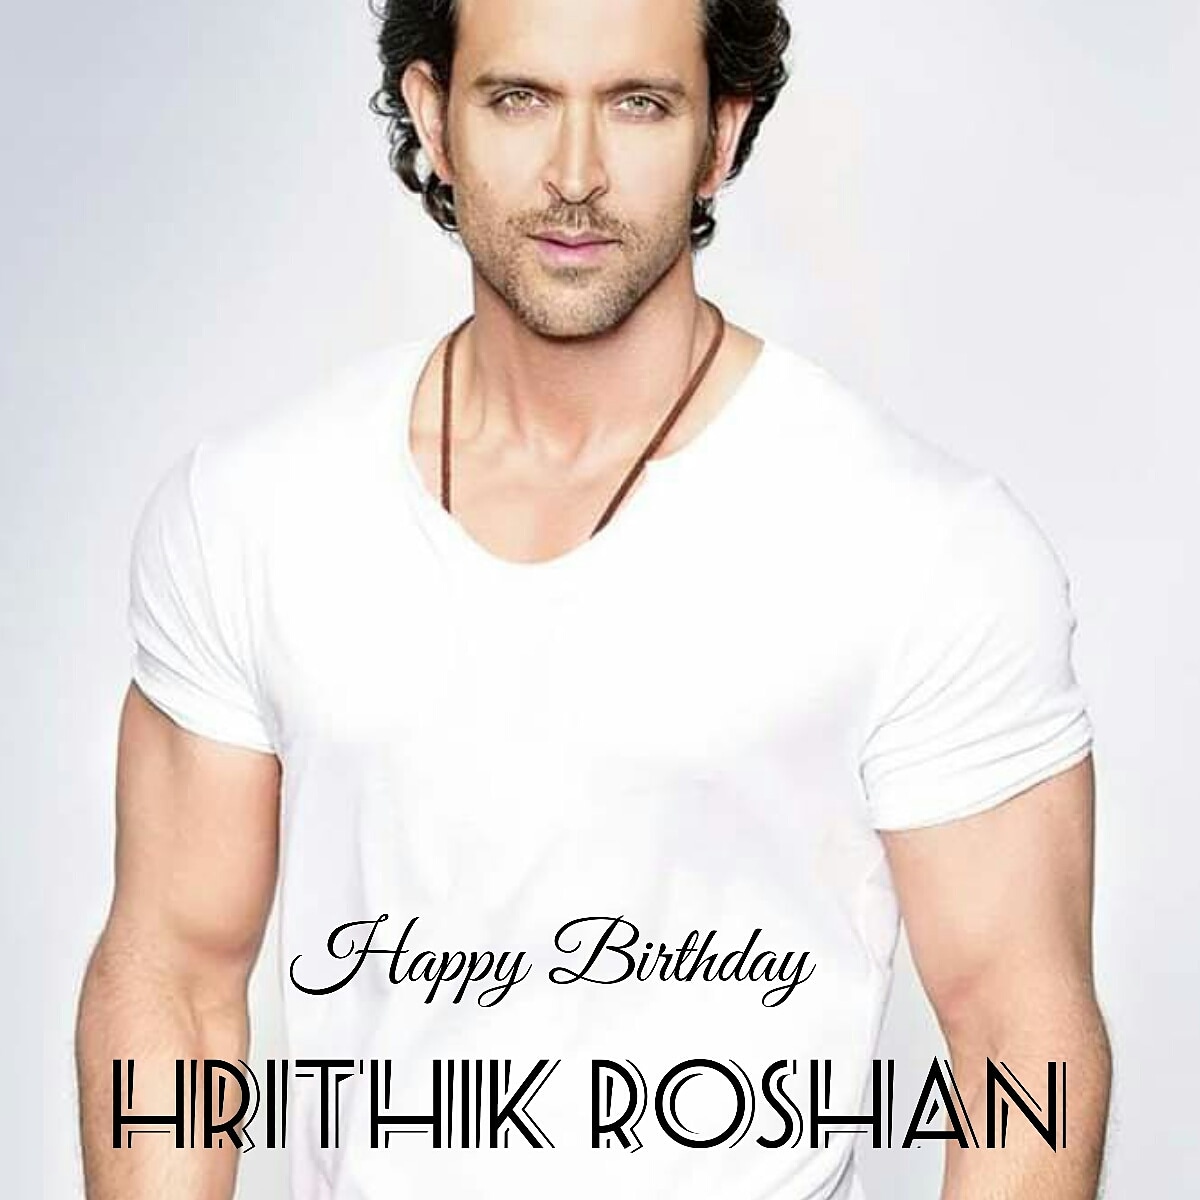 Sm Talent Management 
Wishing a Verry Happy Birthday to
Hrithik Roshan. 
God bless you always. 